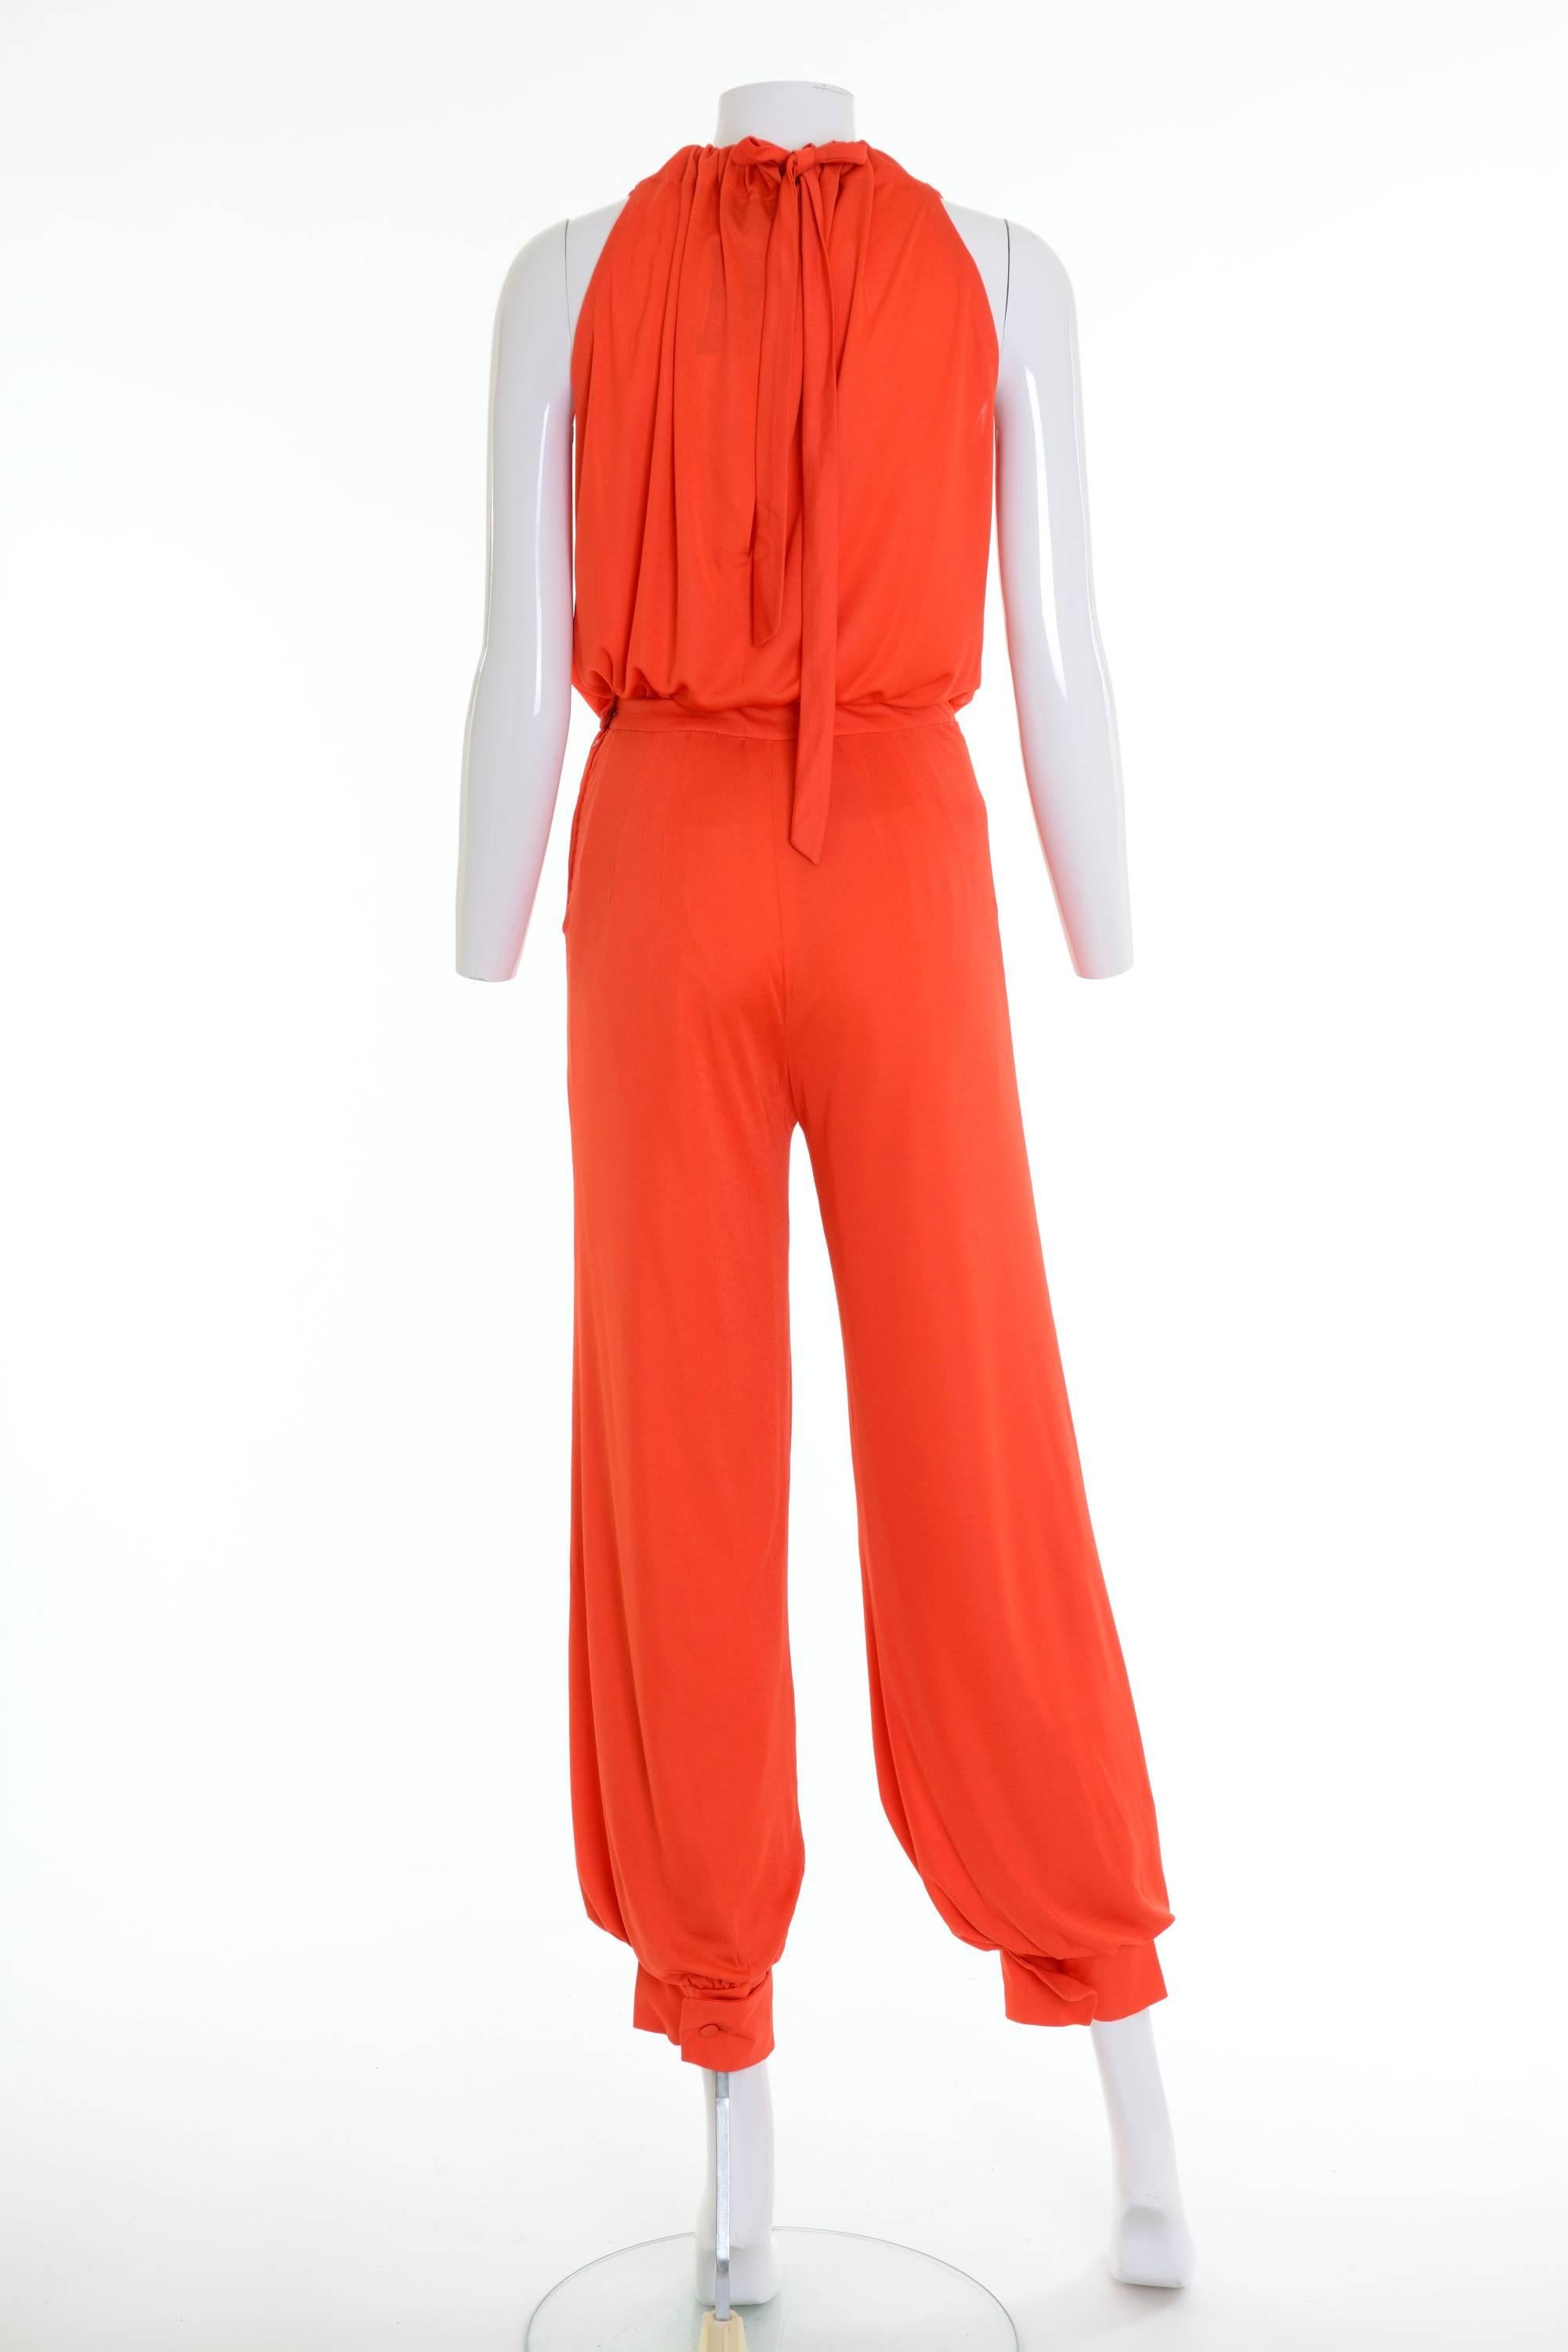 Red 1960s 1970s GIO CARÉ Orange Pants Suit New with Tag For Sale